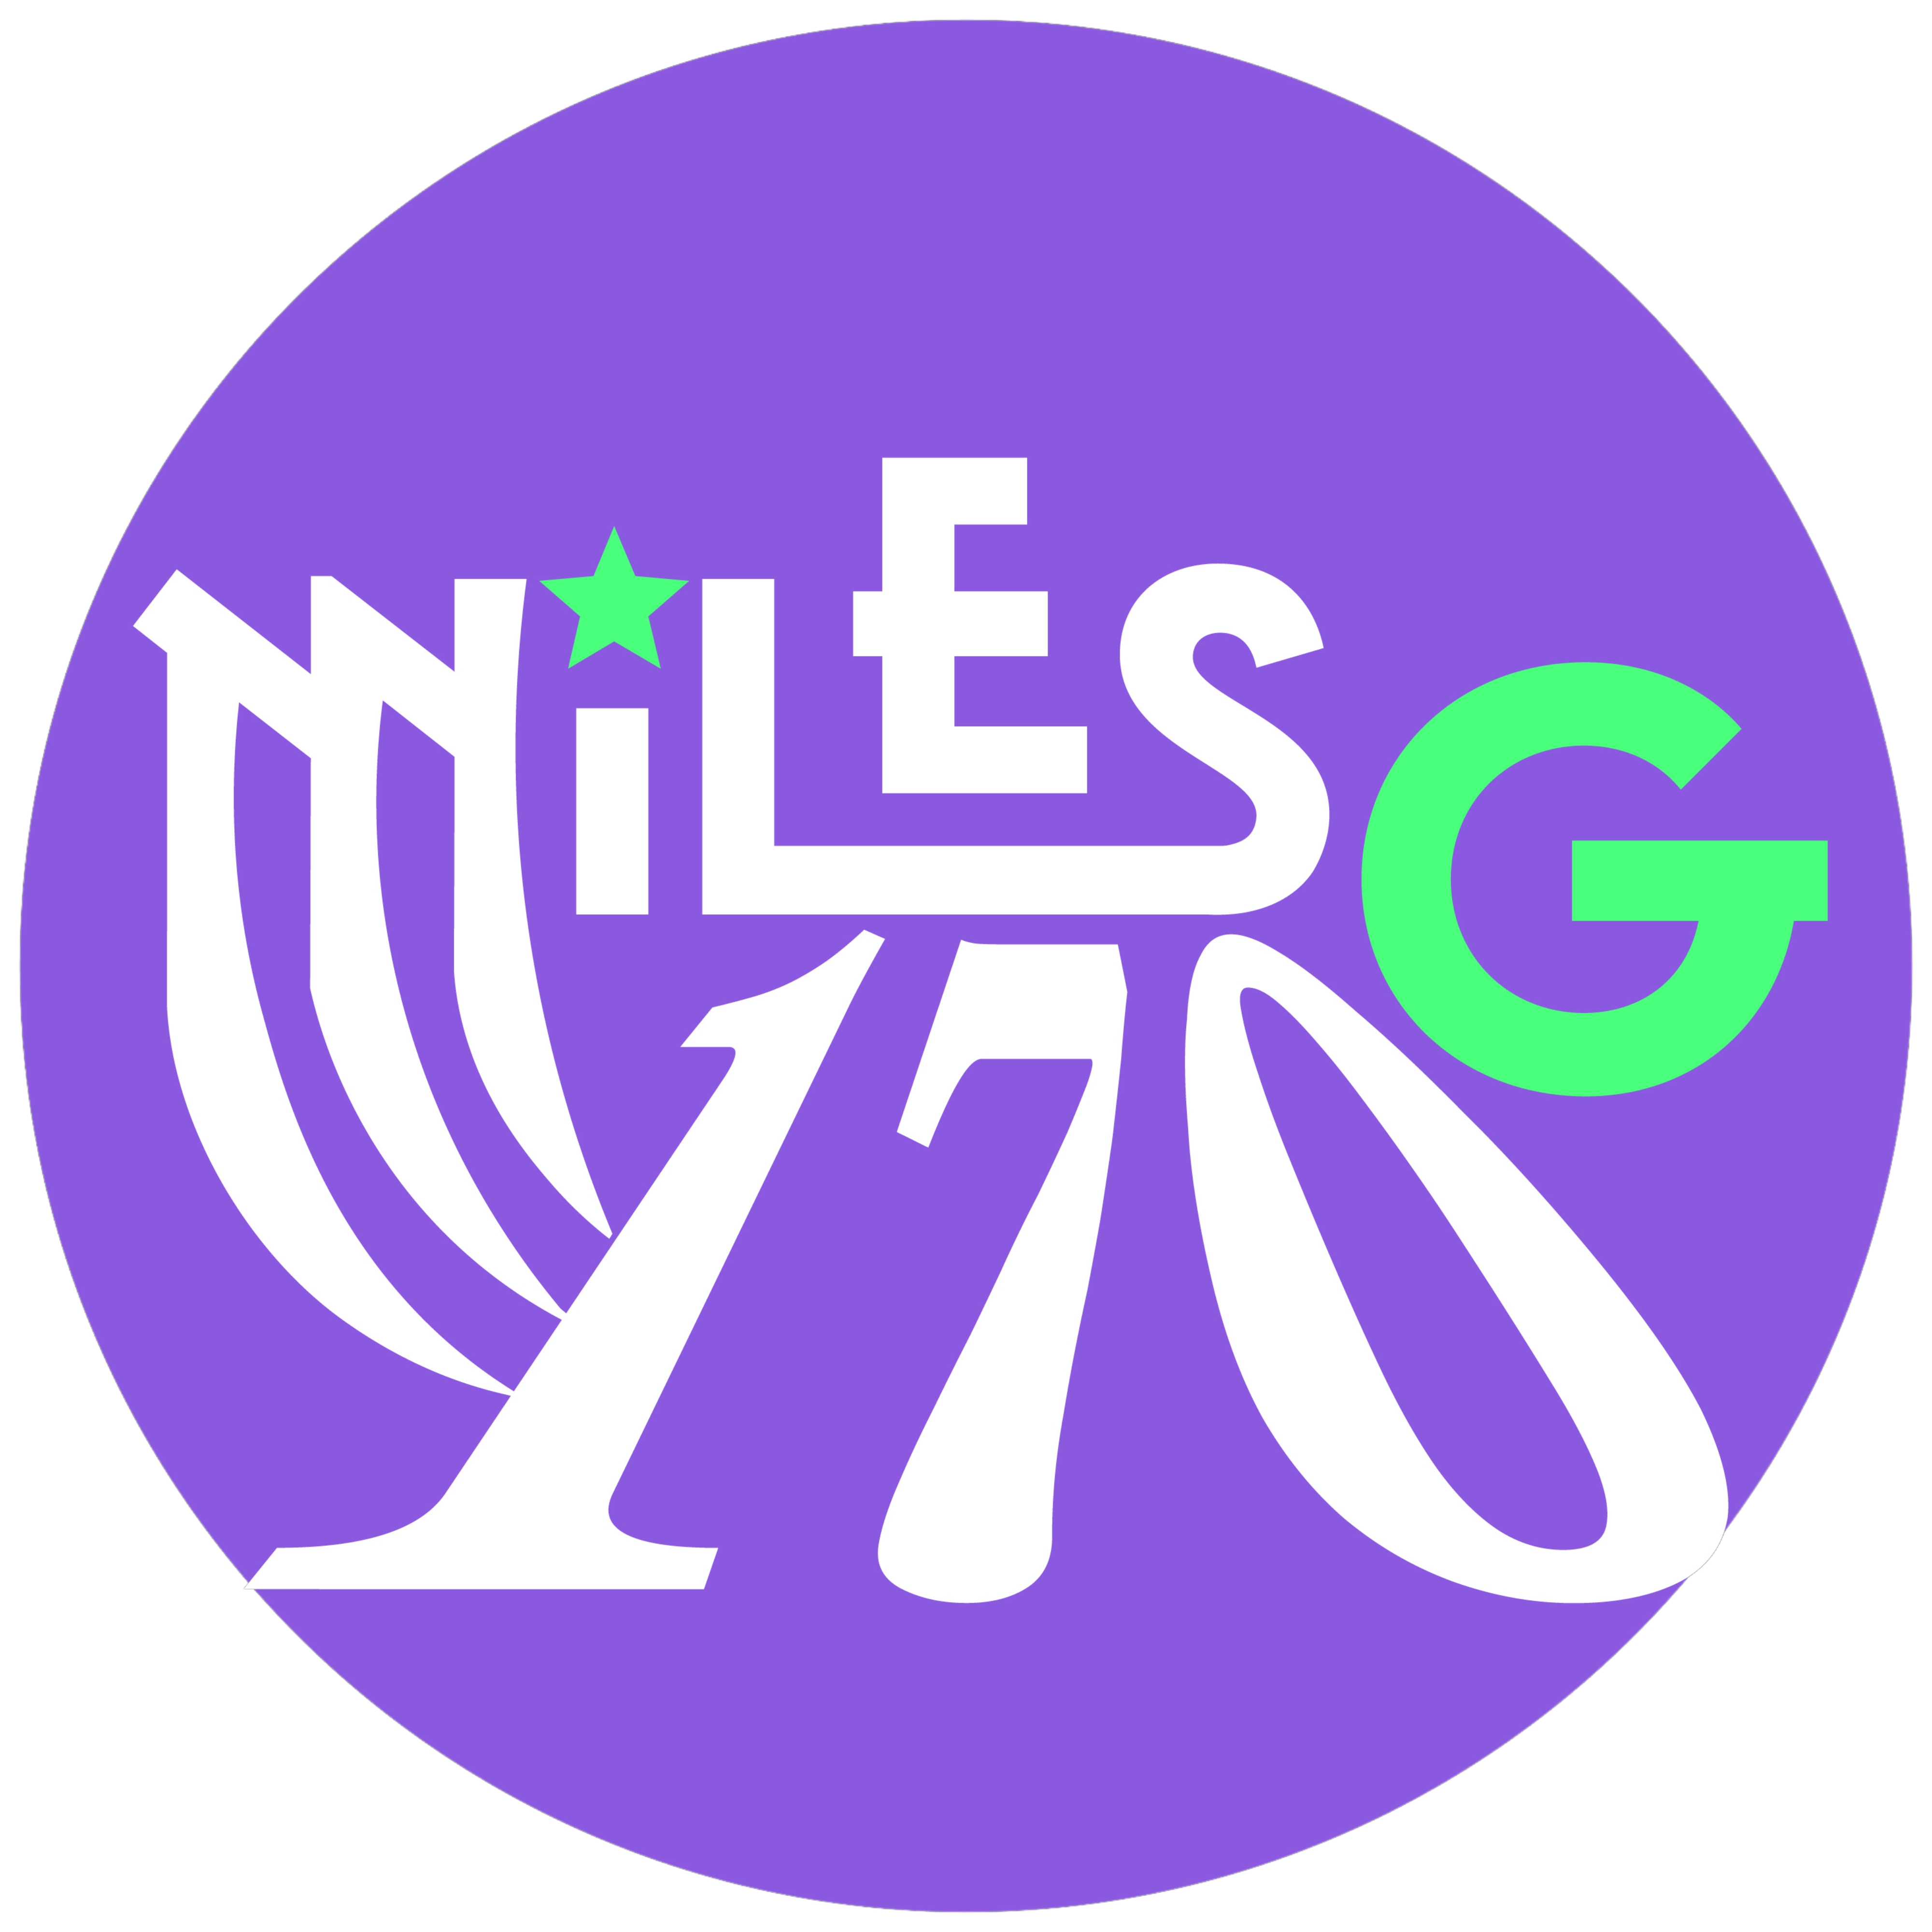 MilesG170: Family-Friendly Content for all ages